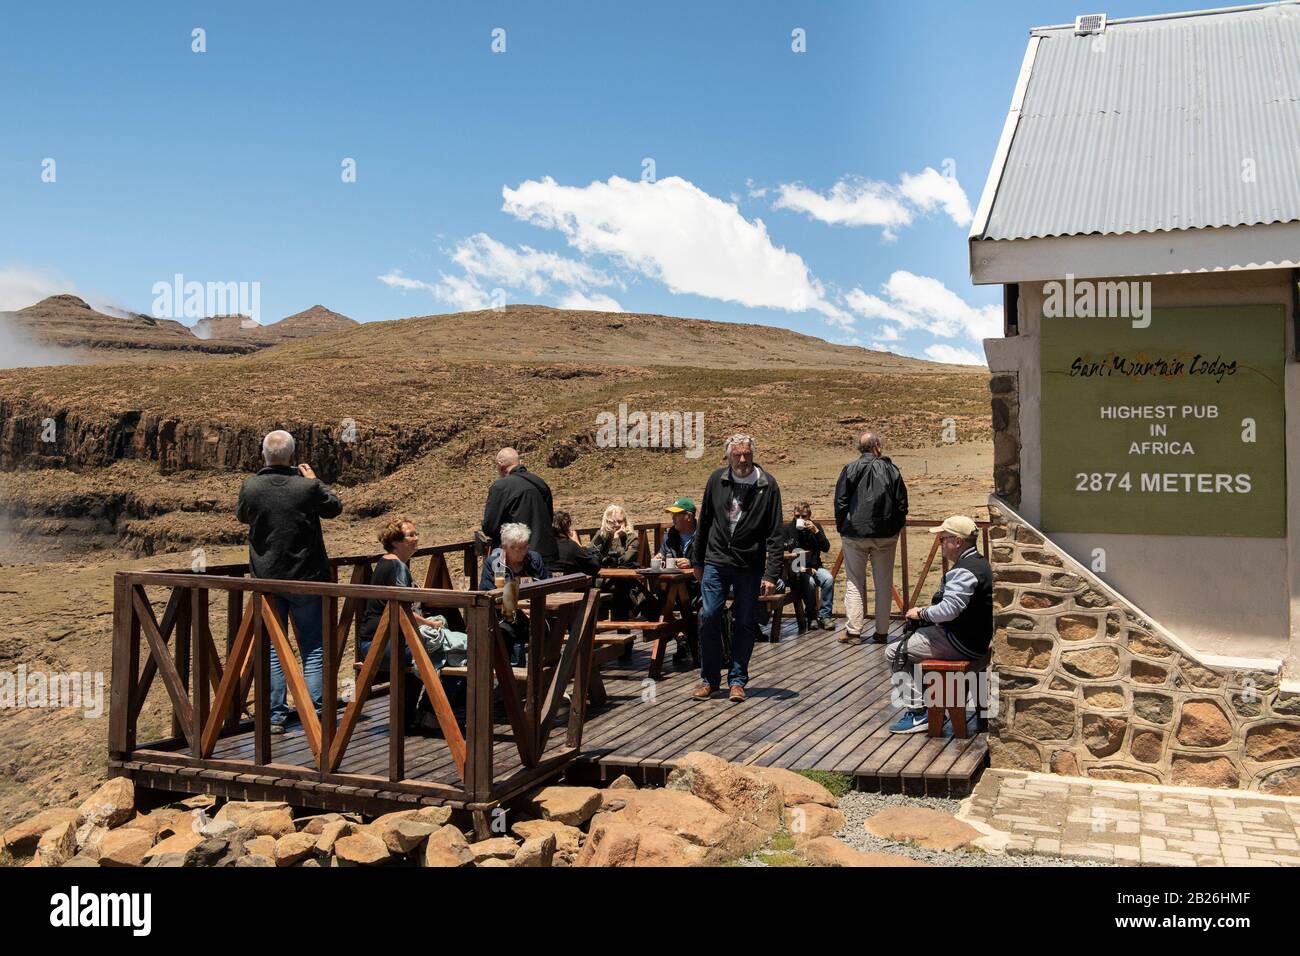 The highest pub in Africa, Sani Mountain Lodge, Lesotho Stock Photo